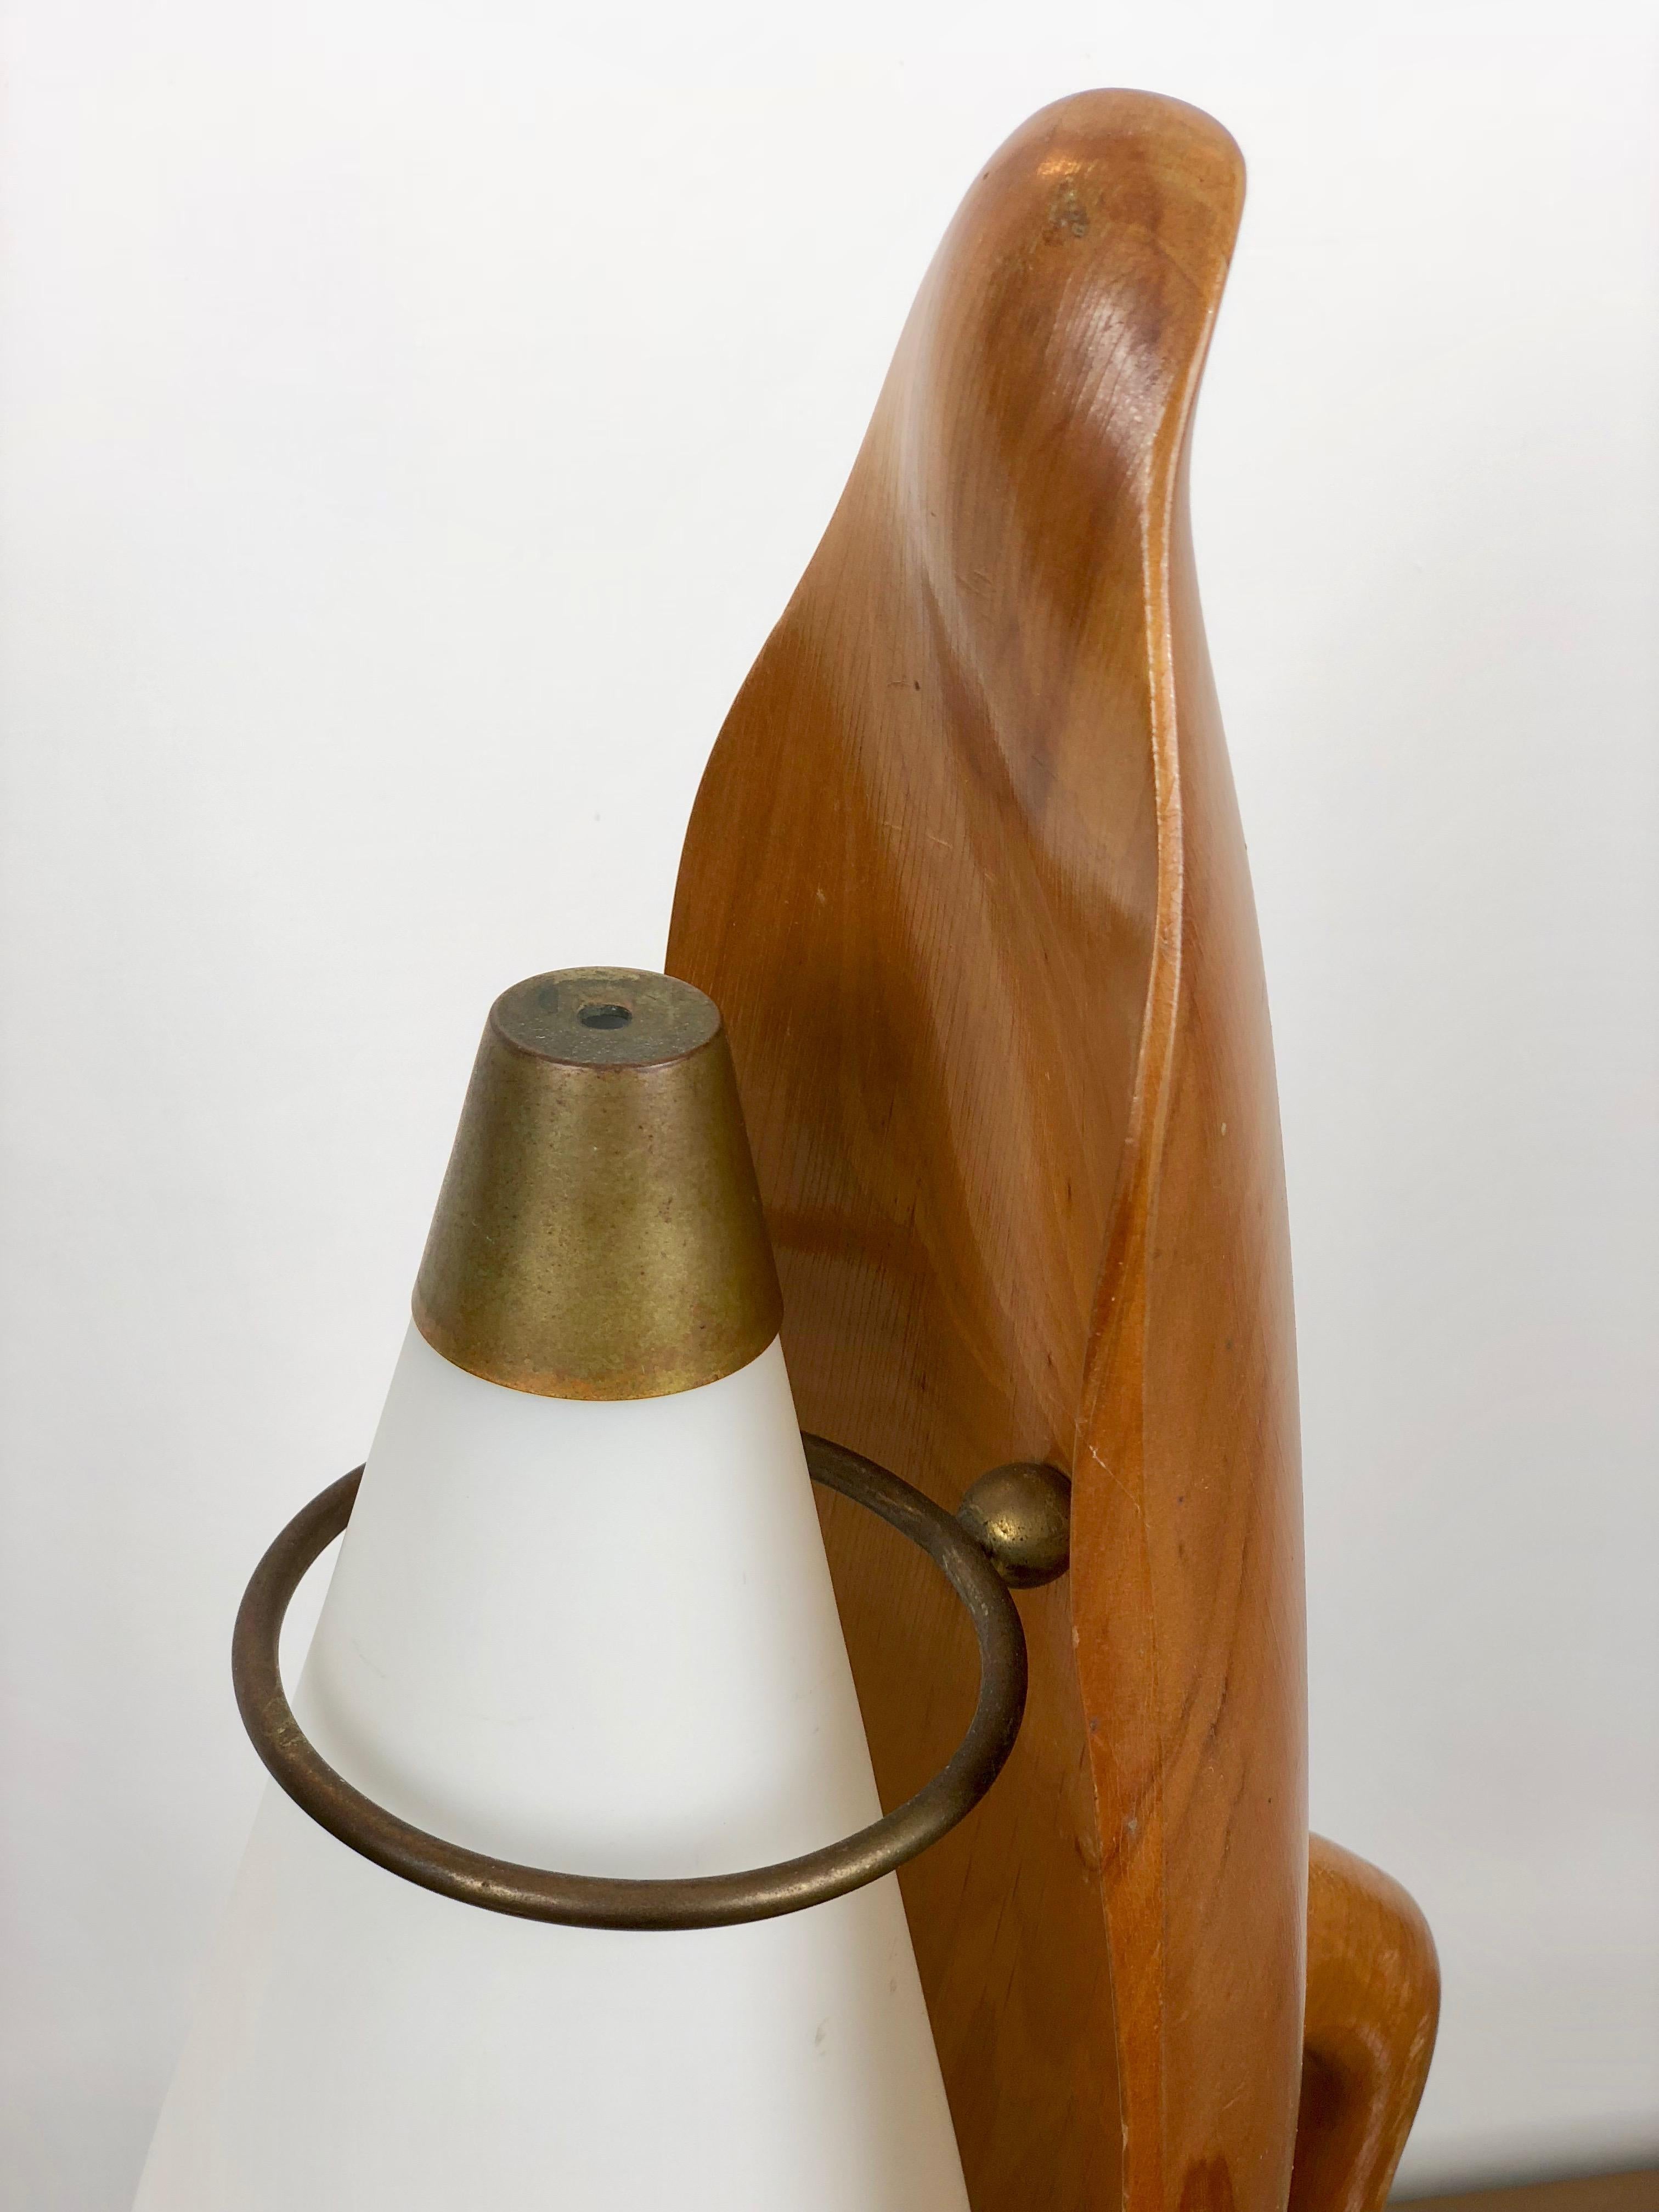 Stylized Dolphin Lamp in Opaline Grass and Wood, Aldo Tura Macabo, Italy, 1950s For Sale 2